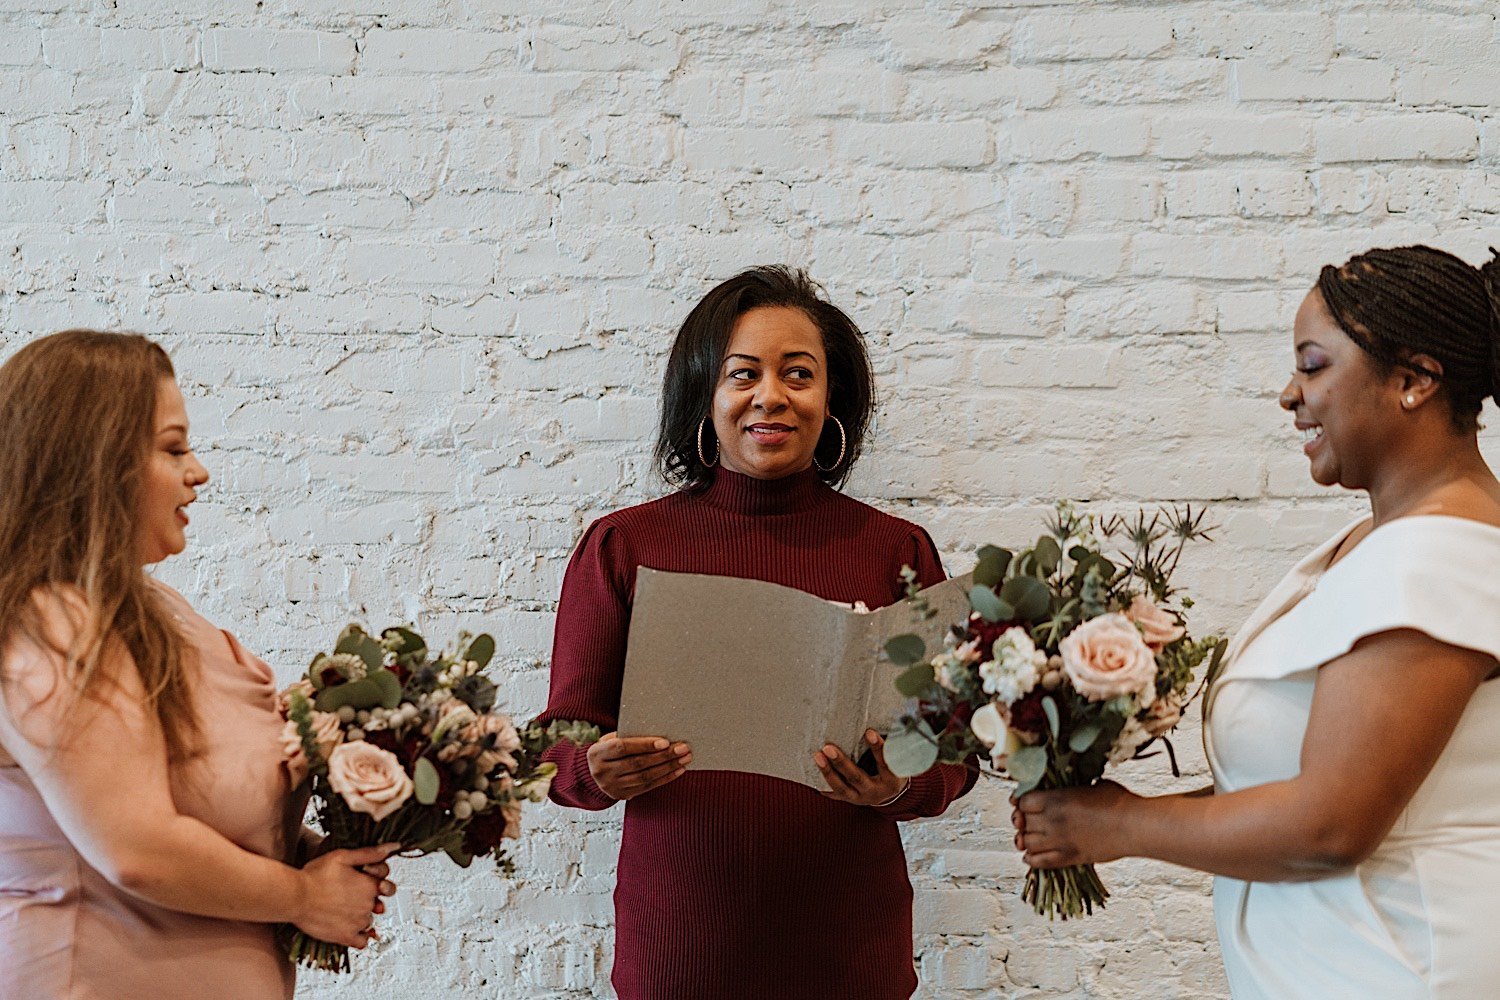 Brides holding flowers as they are married